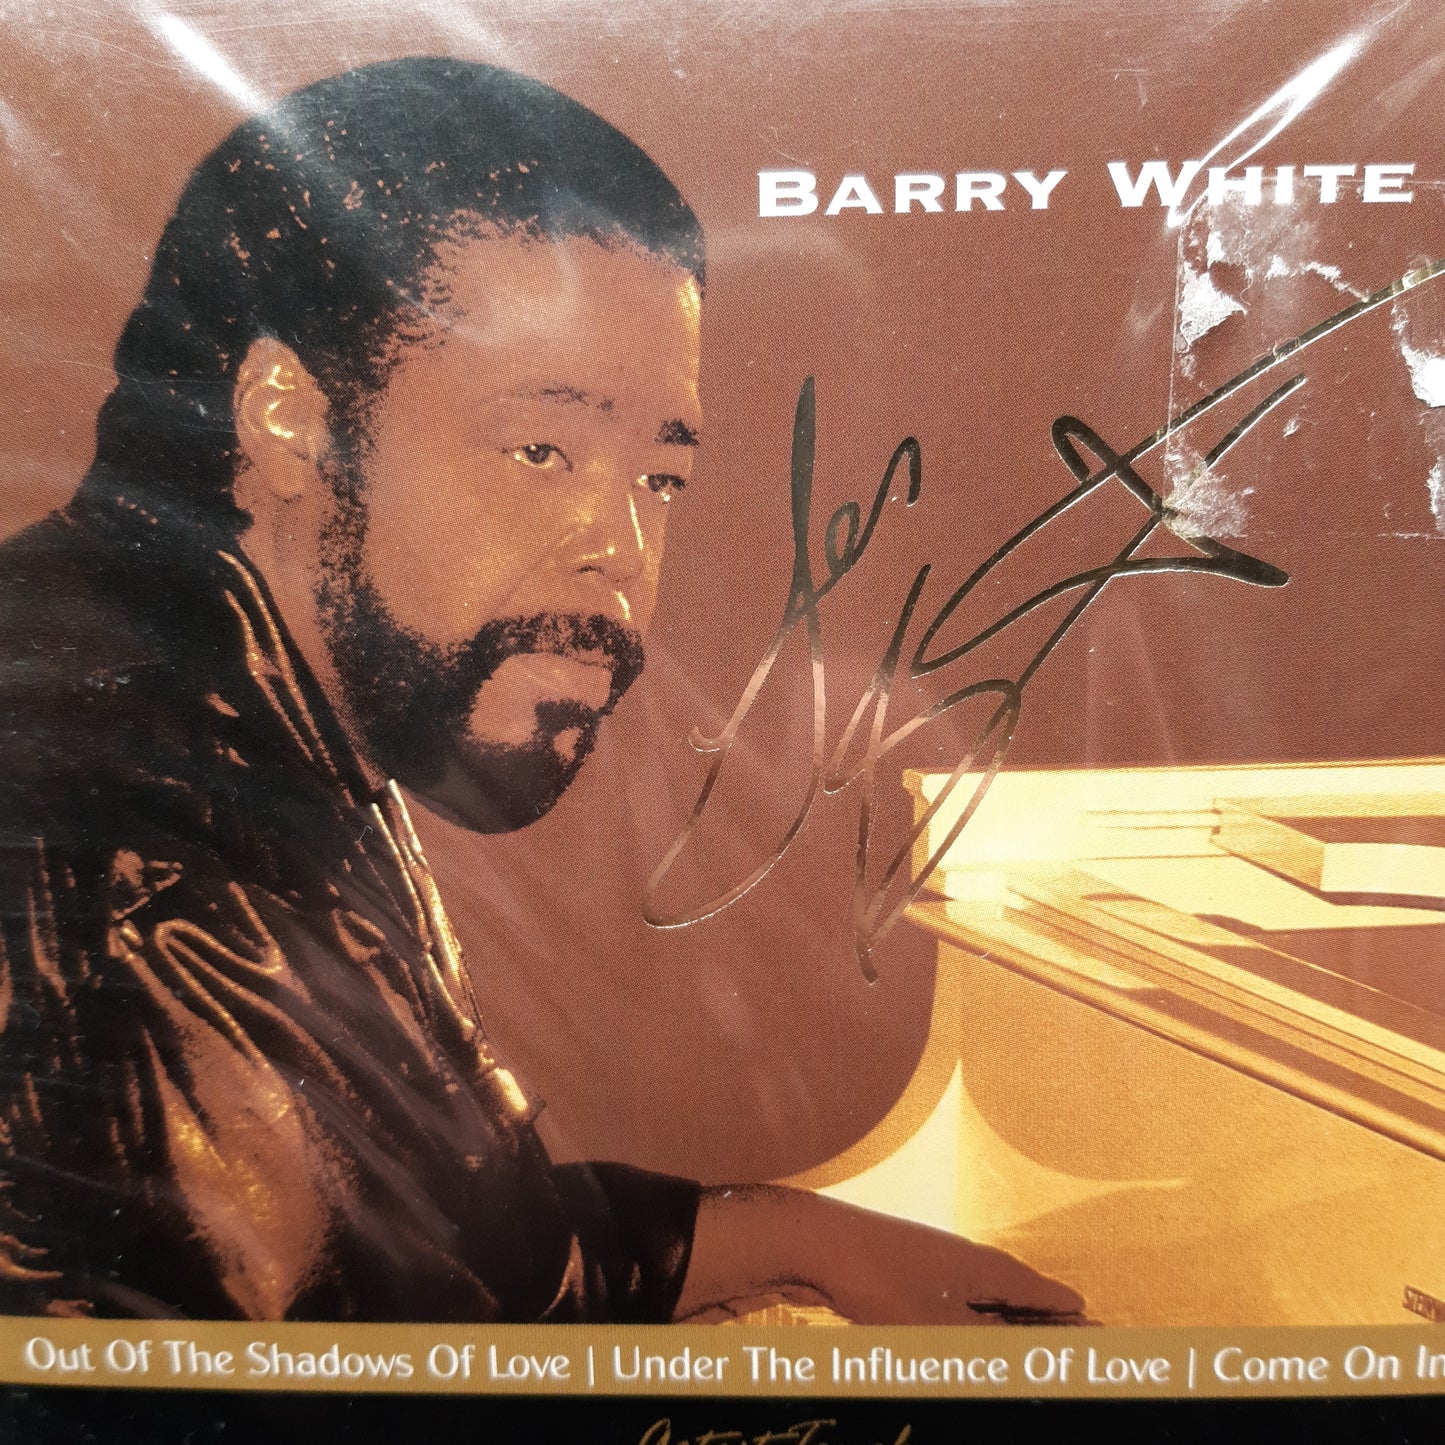 barry white - artist touch